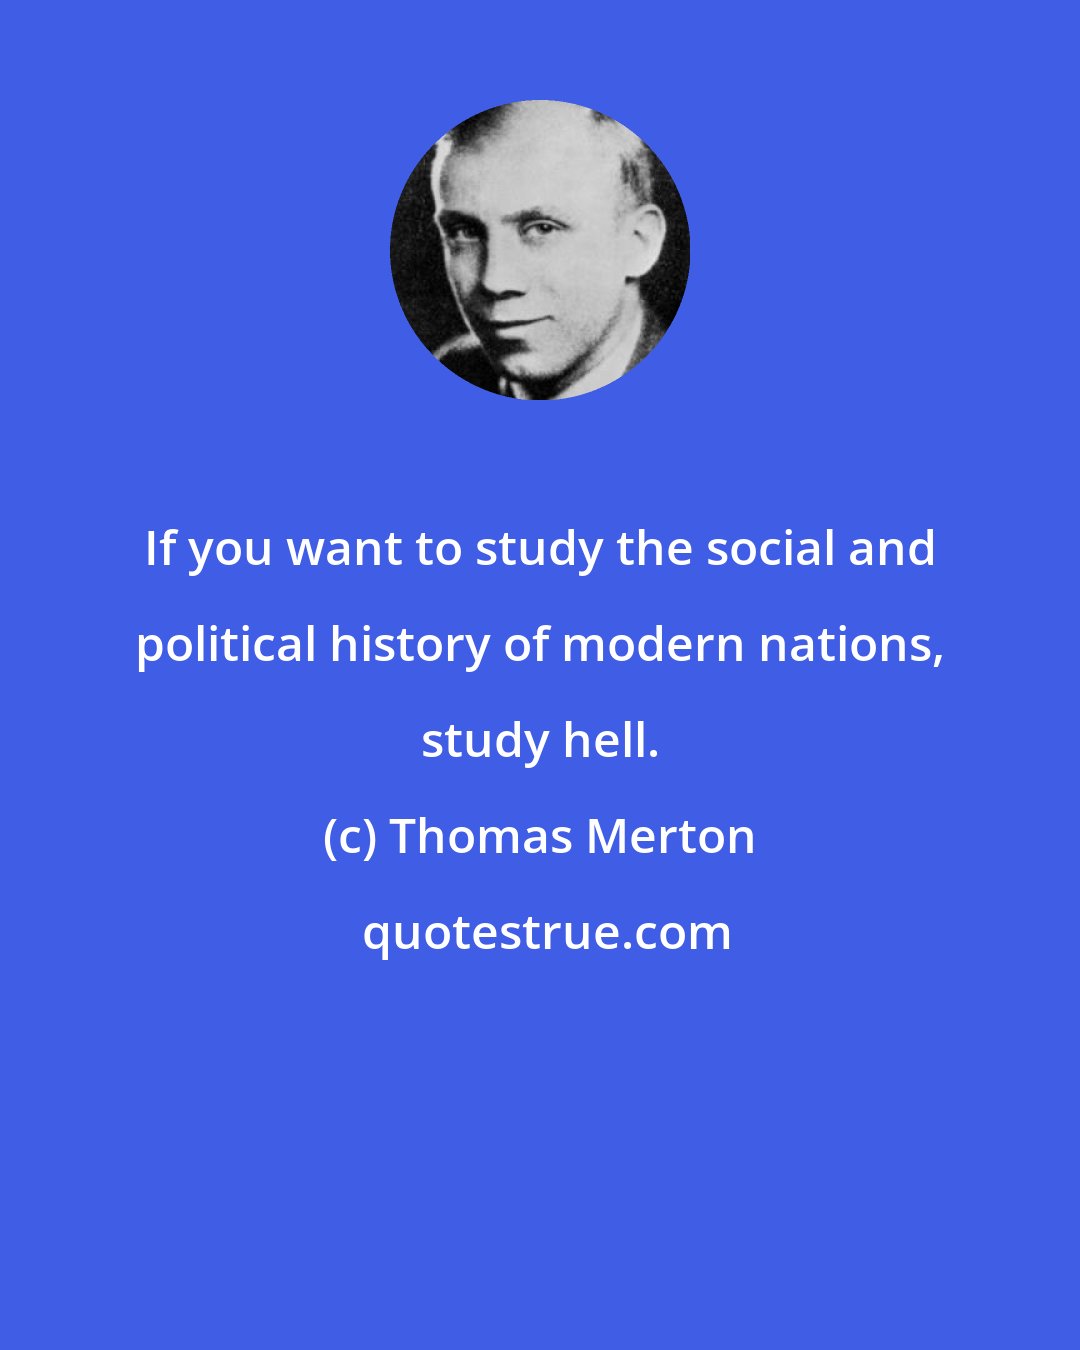 Thomas Merton: If you want to study the social and political history of modern nations, study hell.